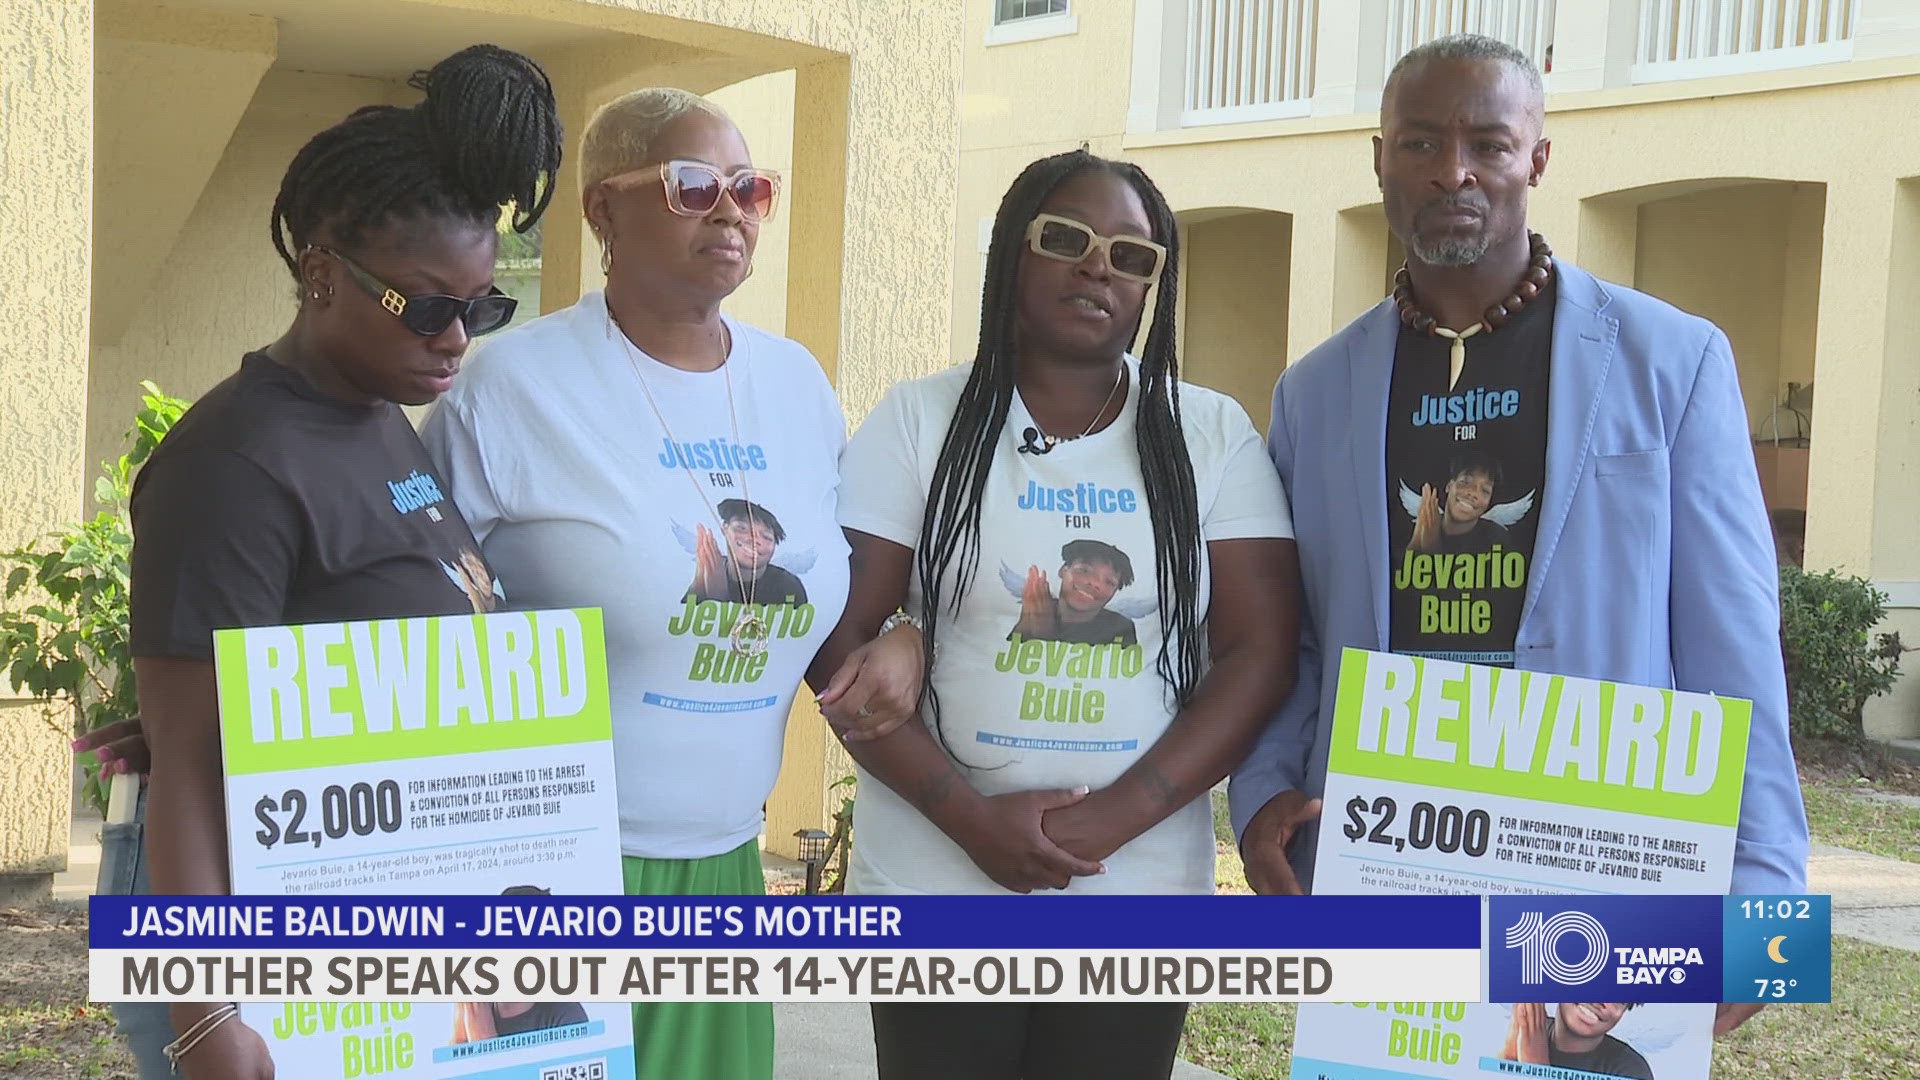 Jasmine Baldwin is calling on police to make an arrest for the murder of her son, Jevario Buie